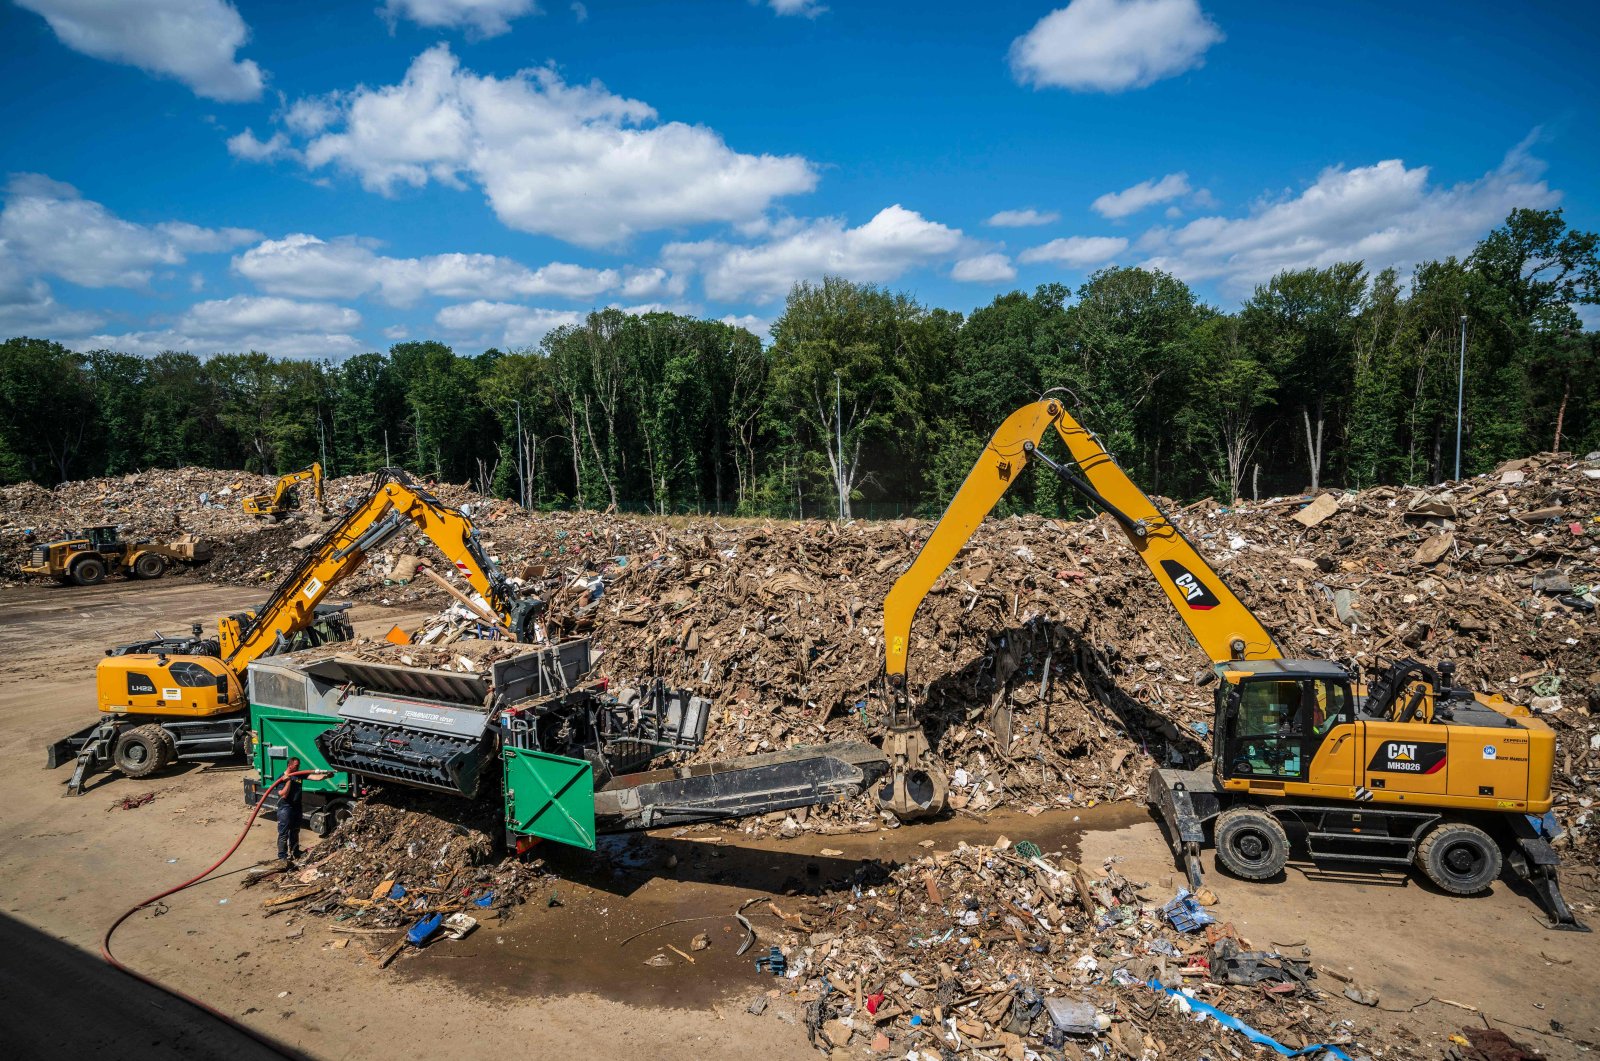 Front-end loaders move waste into a grinding container at the waste management center, an interim storage facility for bulky waste from the flooded regions in the Ahr Valley, in Niederzissen, North Rhine-Westphalia, western Germany, July 30, 2021. (AFP Photo)